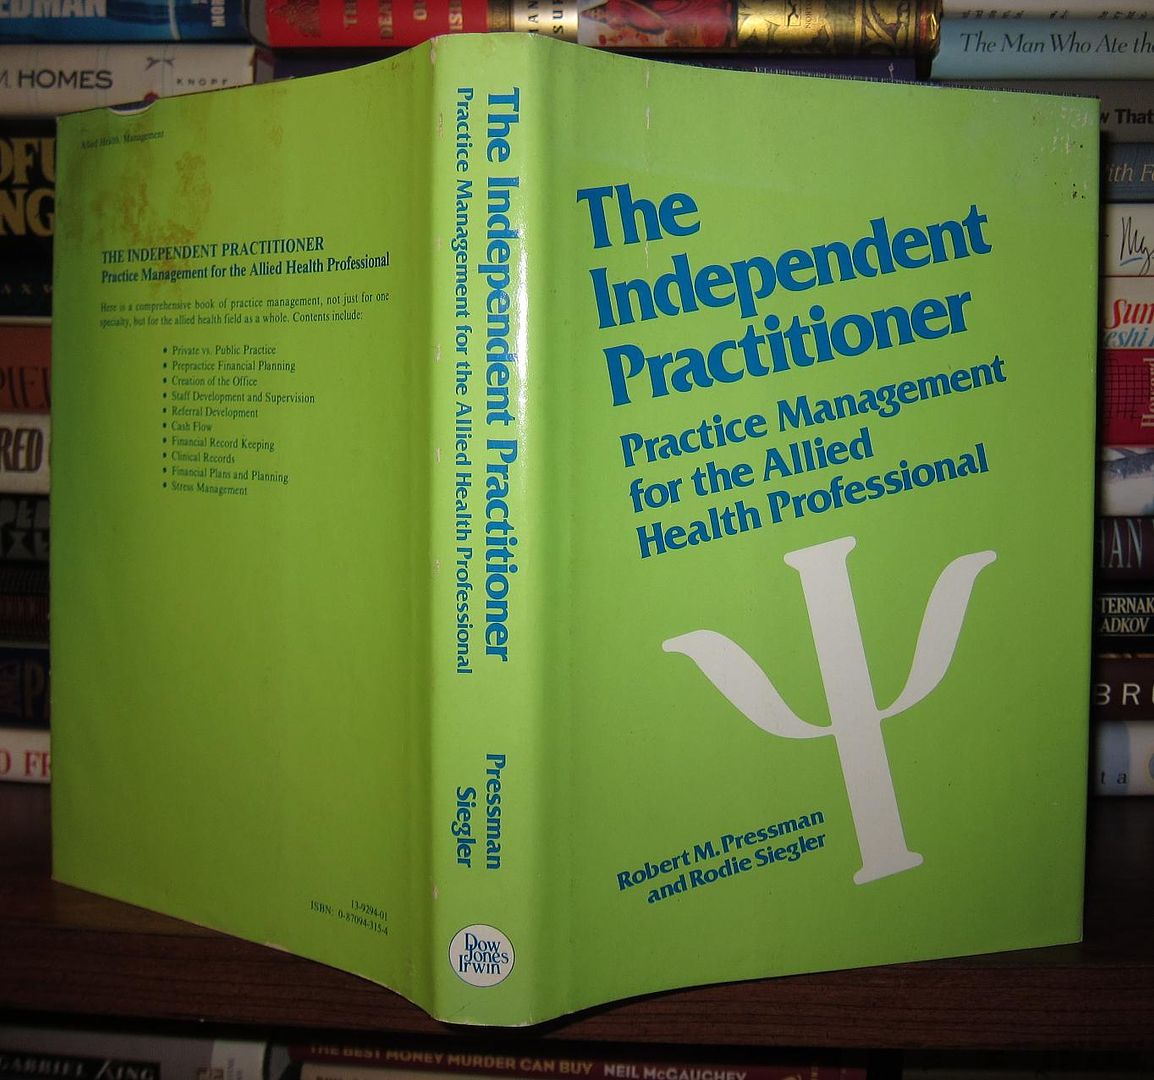 PRESSMAN, ROBERT & RODIE SIEGLER - The Independent Practitioner Practice Management for the Allied Health Professional